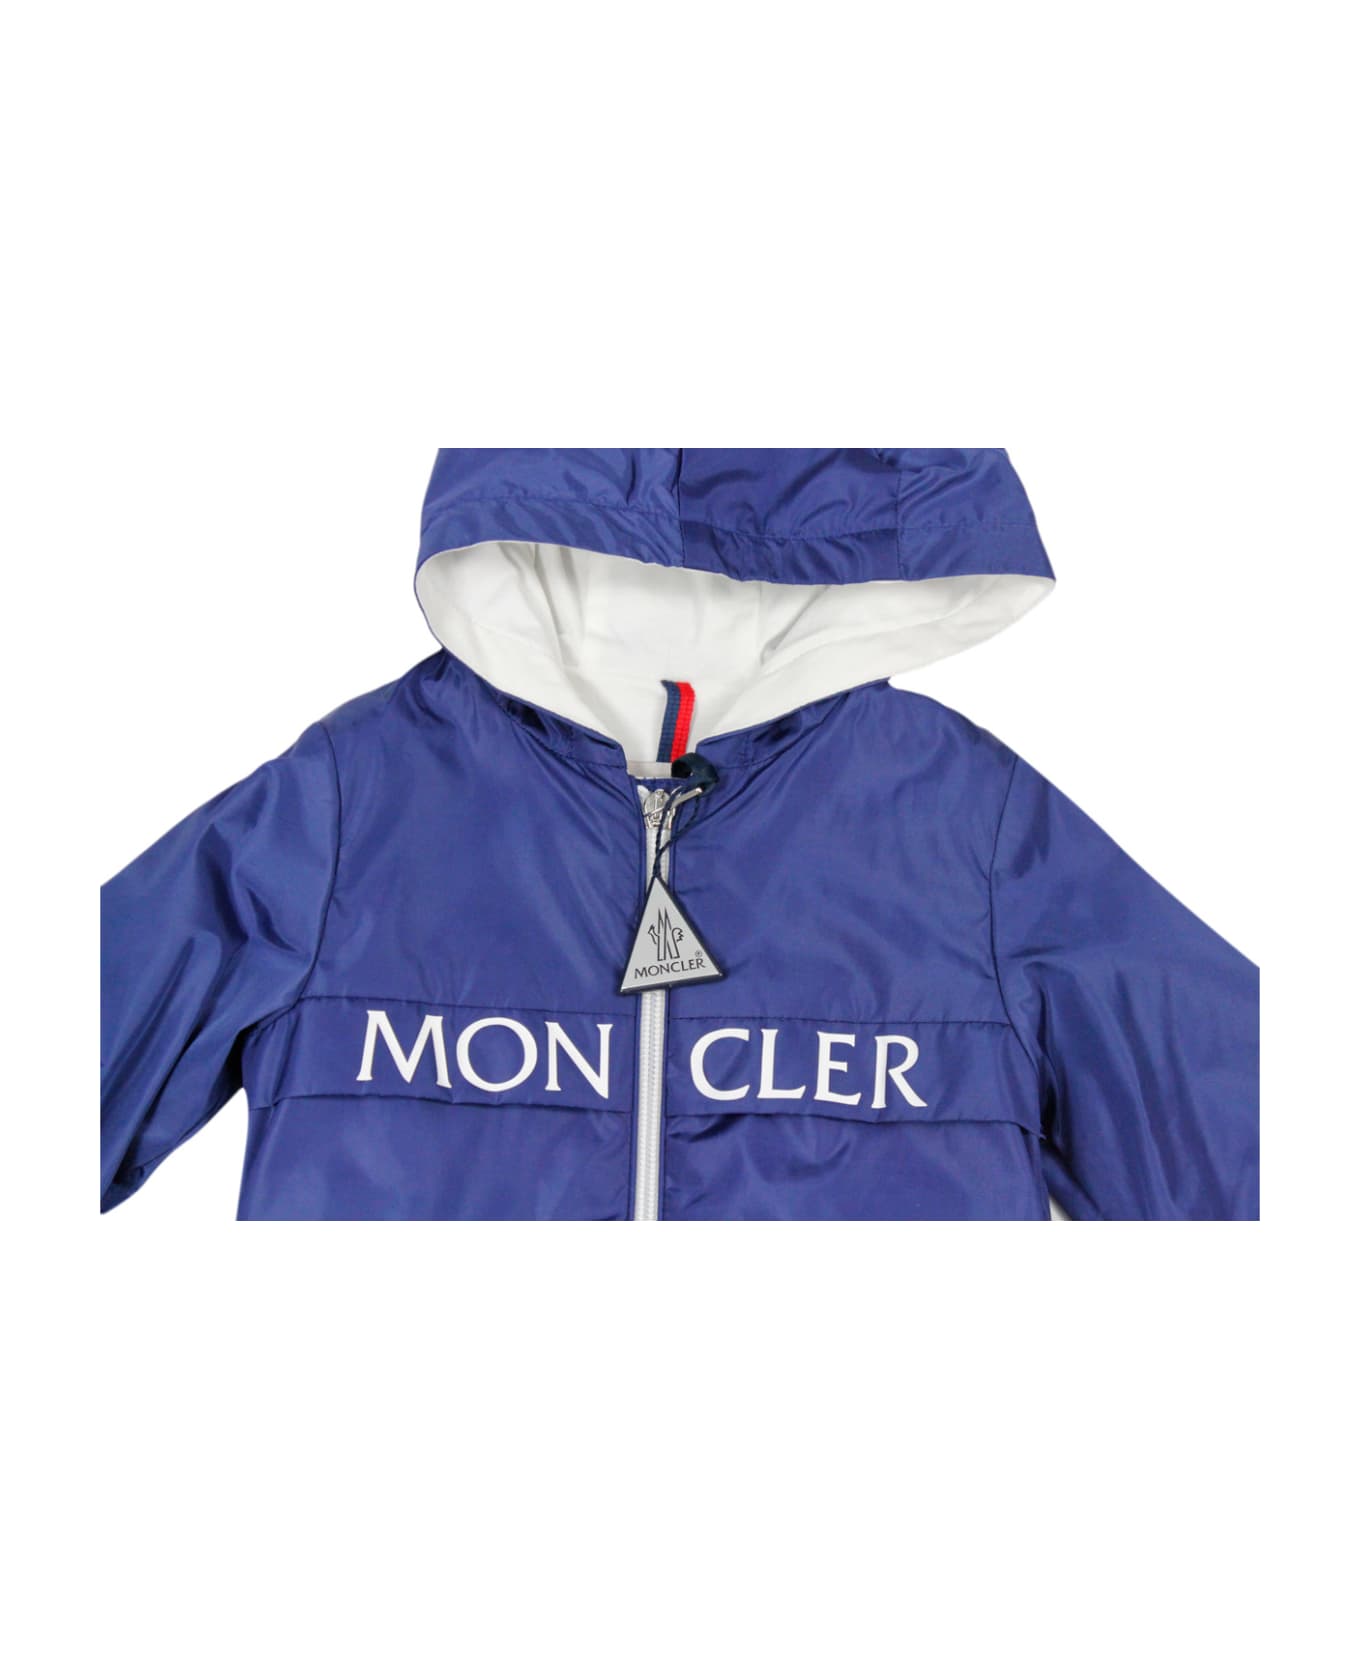 Moncler Erdvile Jacket In Light Nylon With Hood And Zip Closure With Logo Printed On The Chest, Internally Lined In Jersey. - Blu